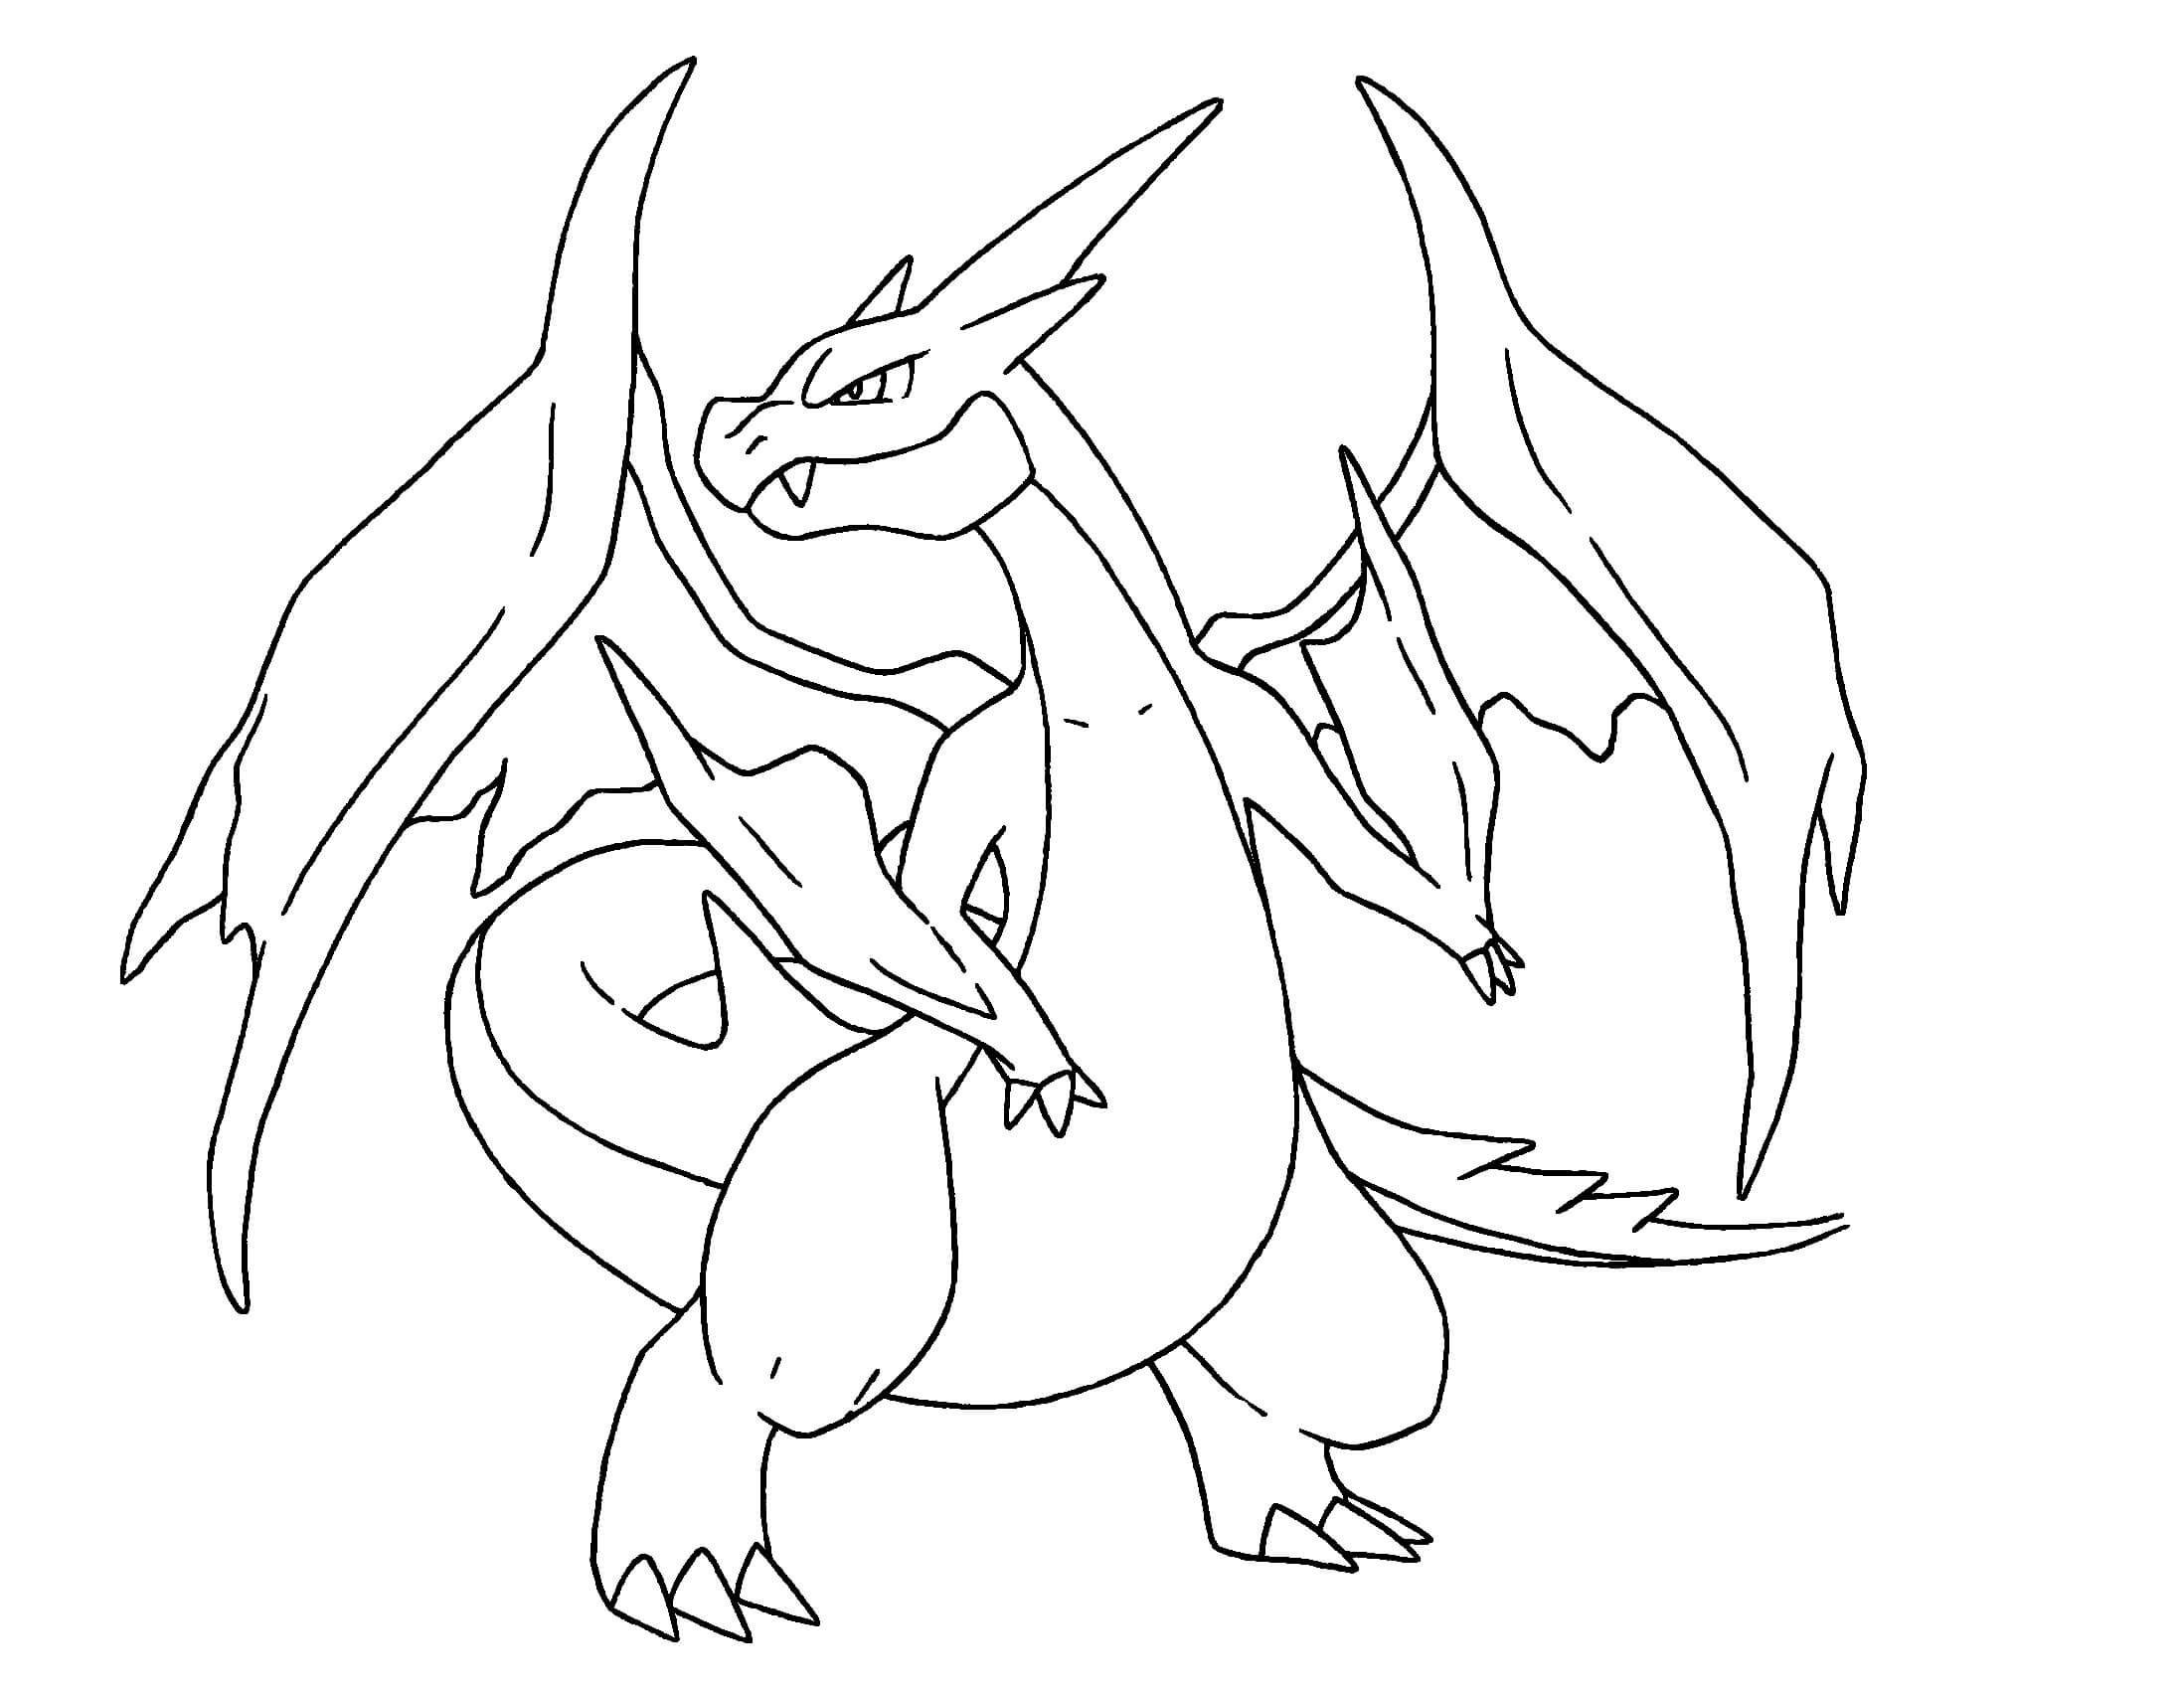 Printable Charizard Coloring Pages - Pokemon Coloring Pages Charizard